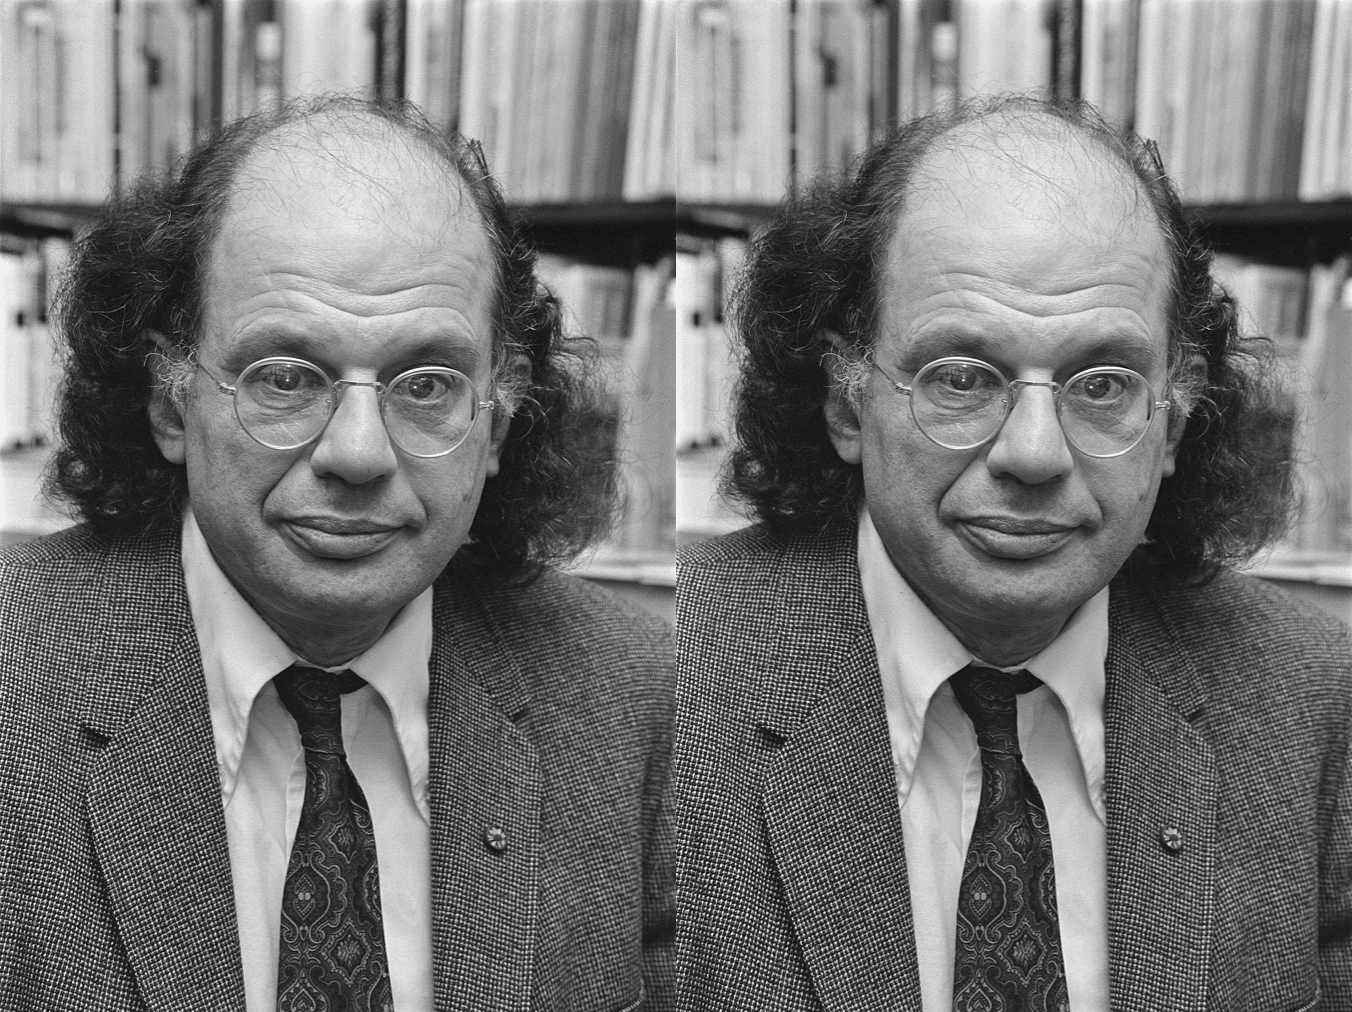 Black and white photograph of Allen Ginsberg in his later years